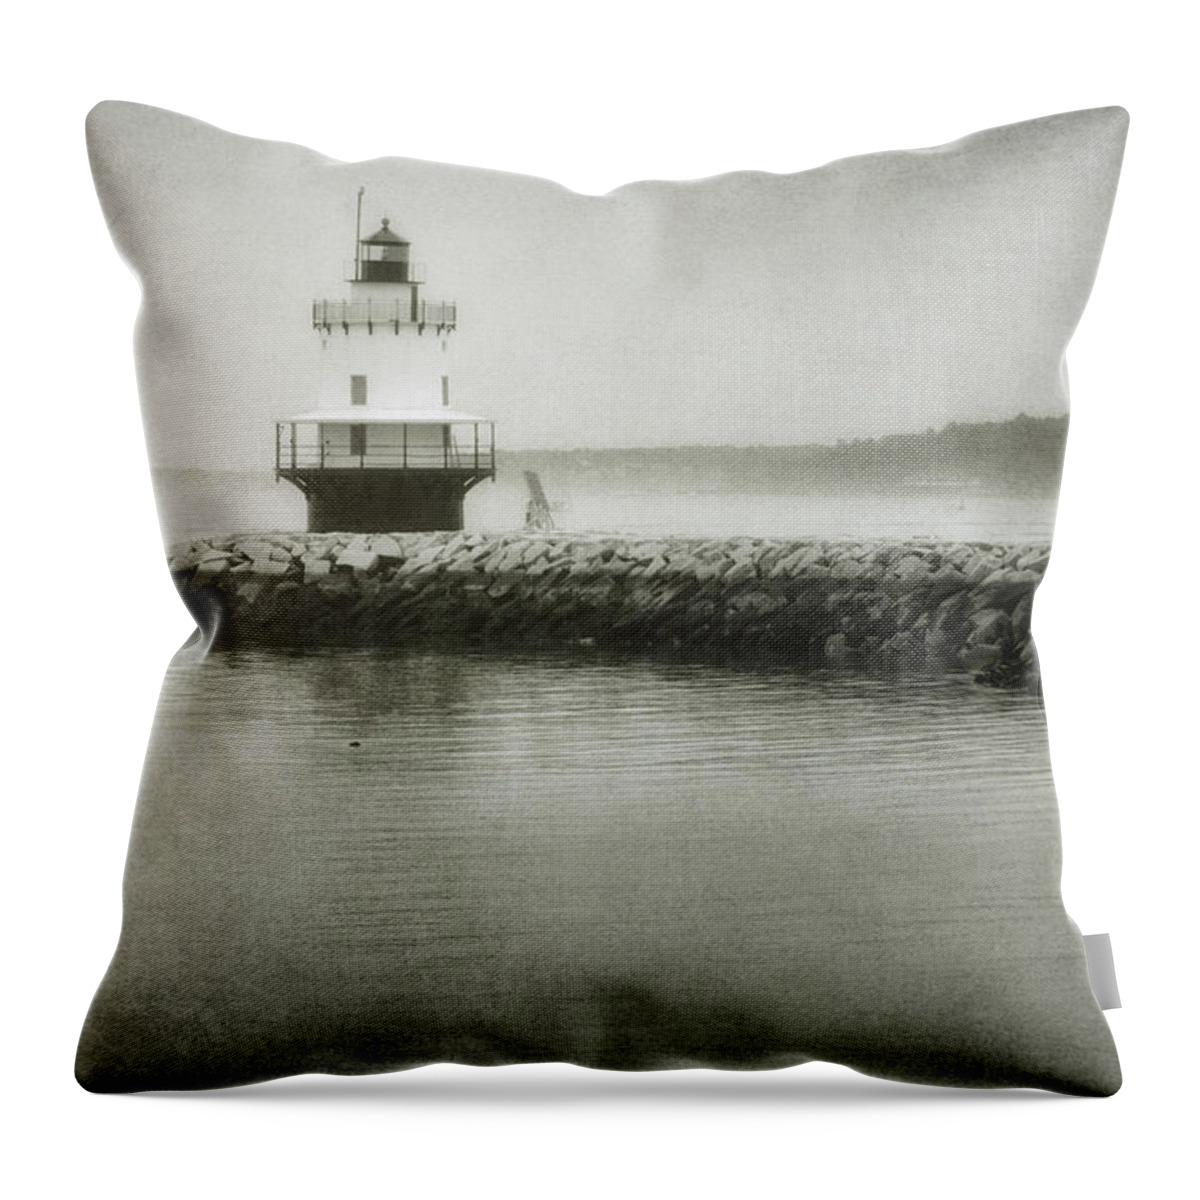 Bay Throw Pillow featuring the photograph Spring Point Ledge Light by Joan Carroll